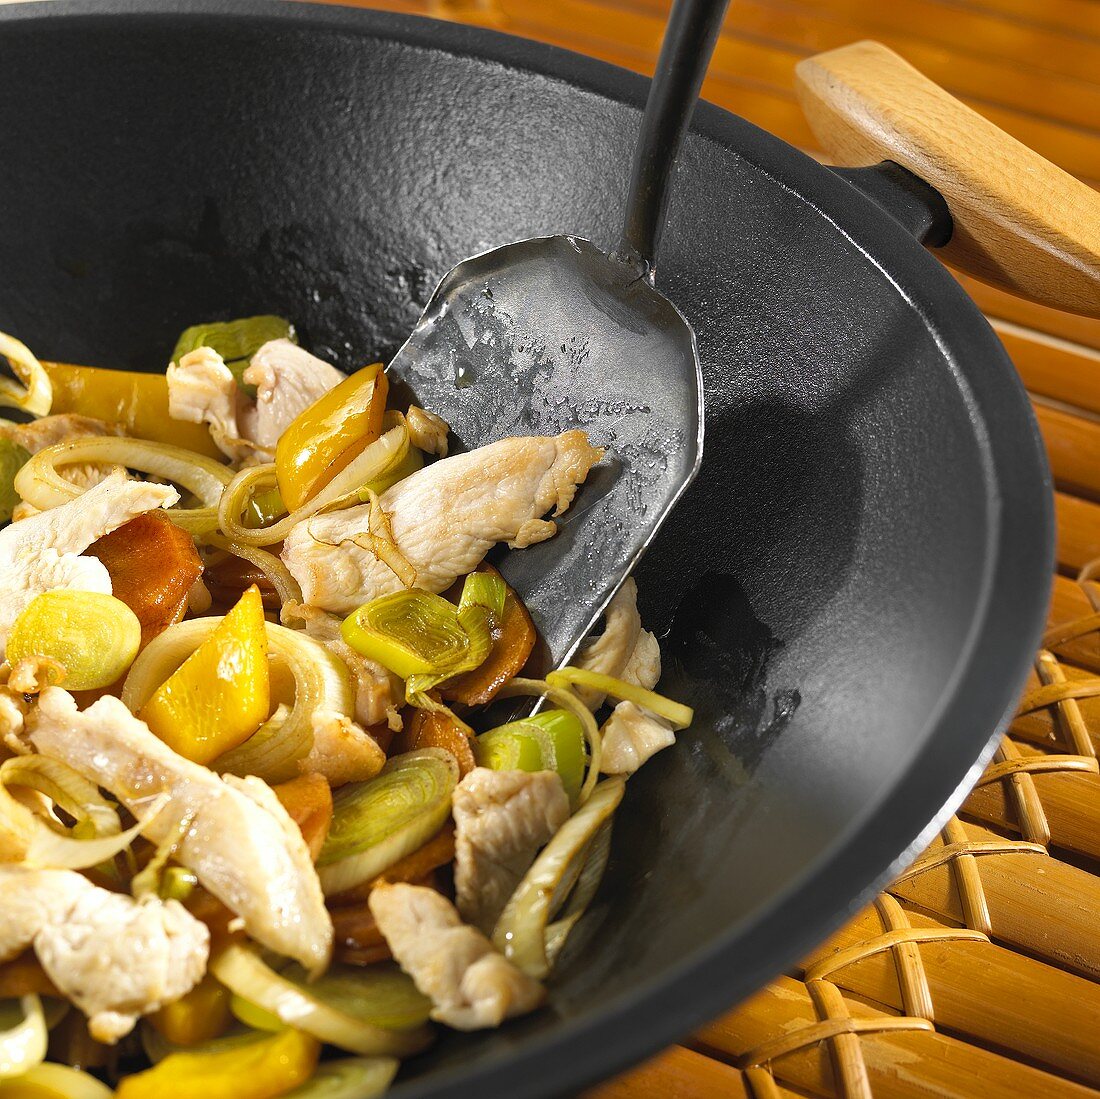 Wok-cooked vegetables with chicken